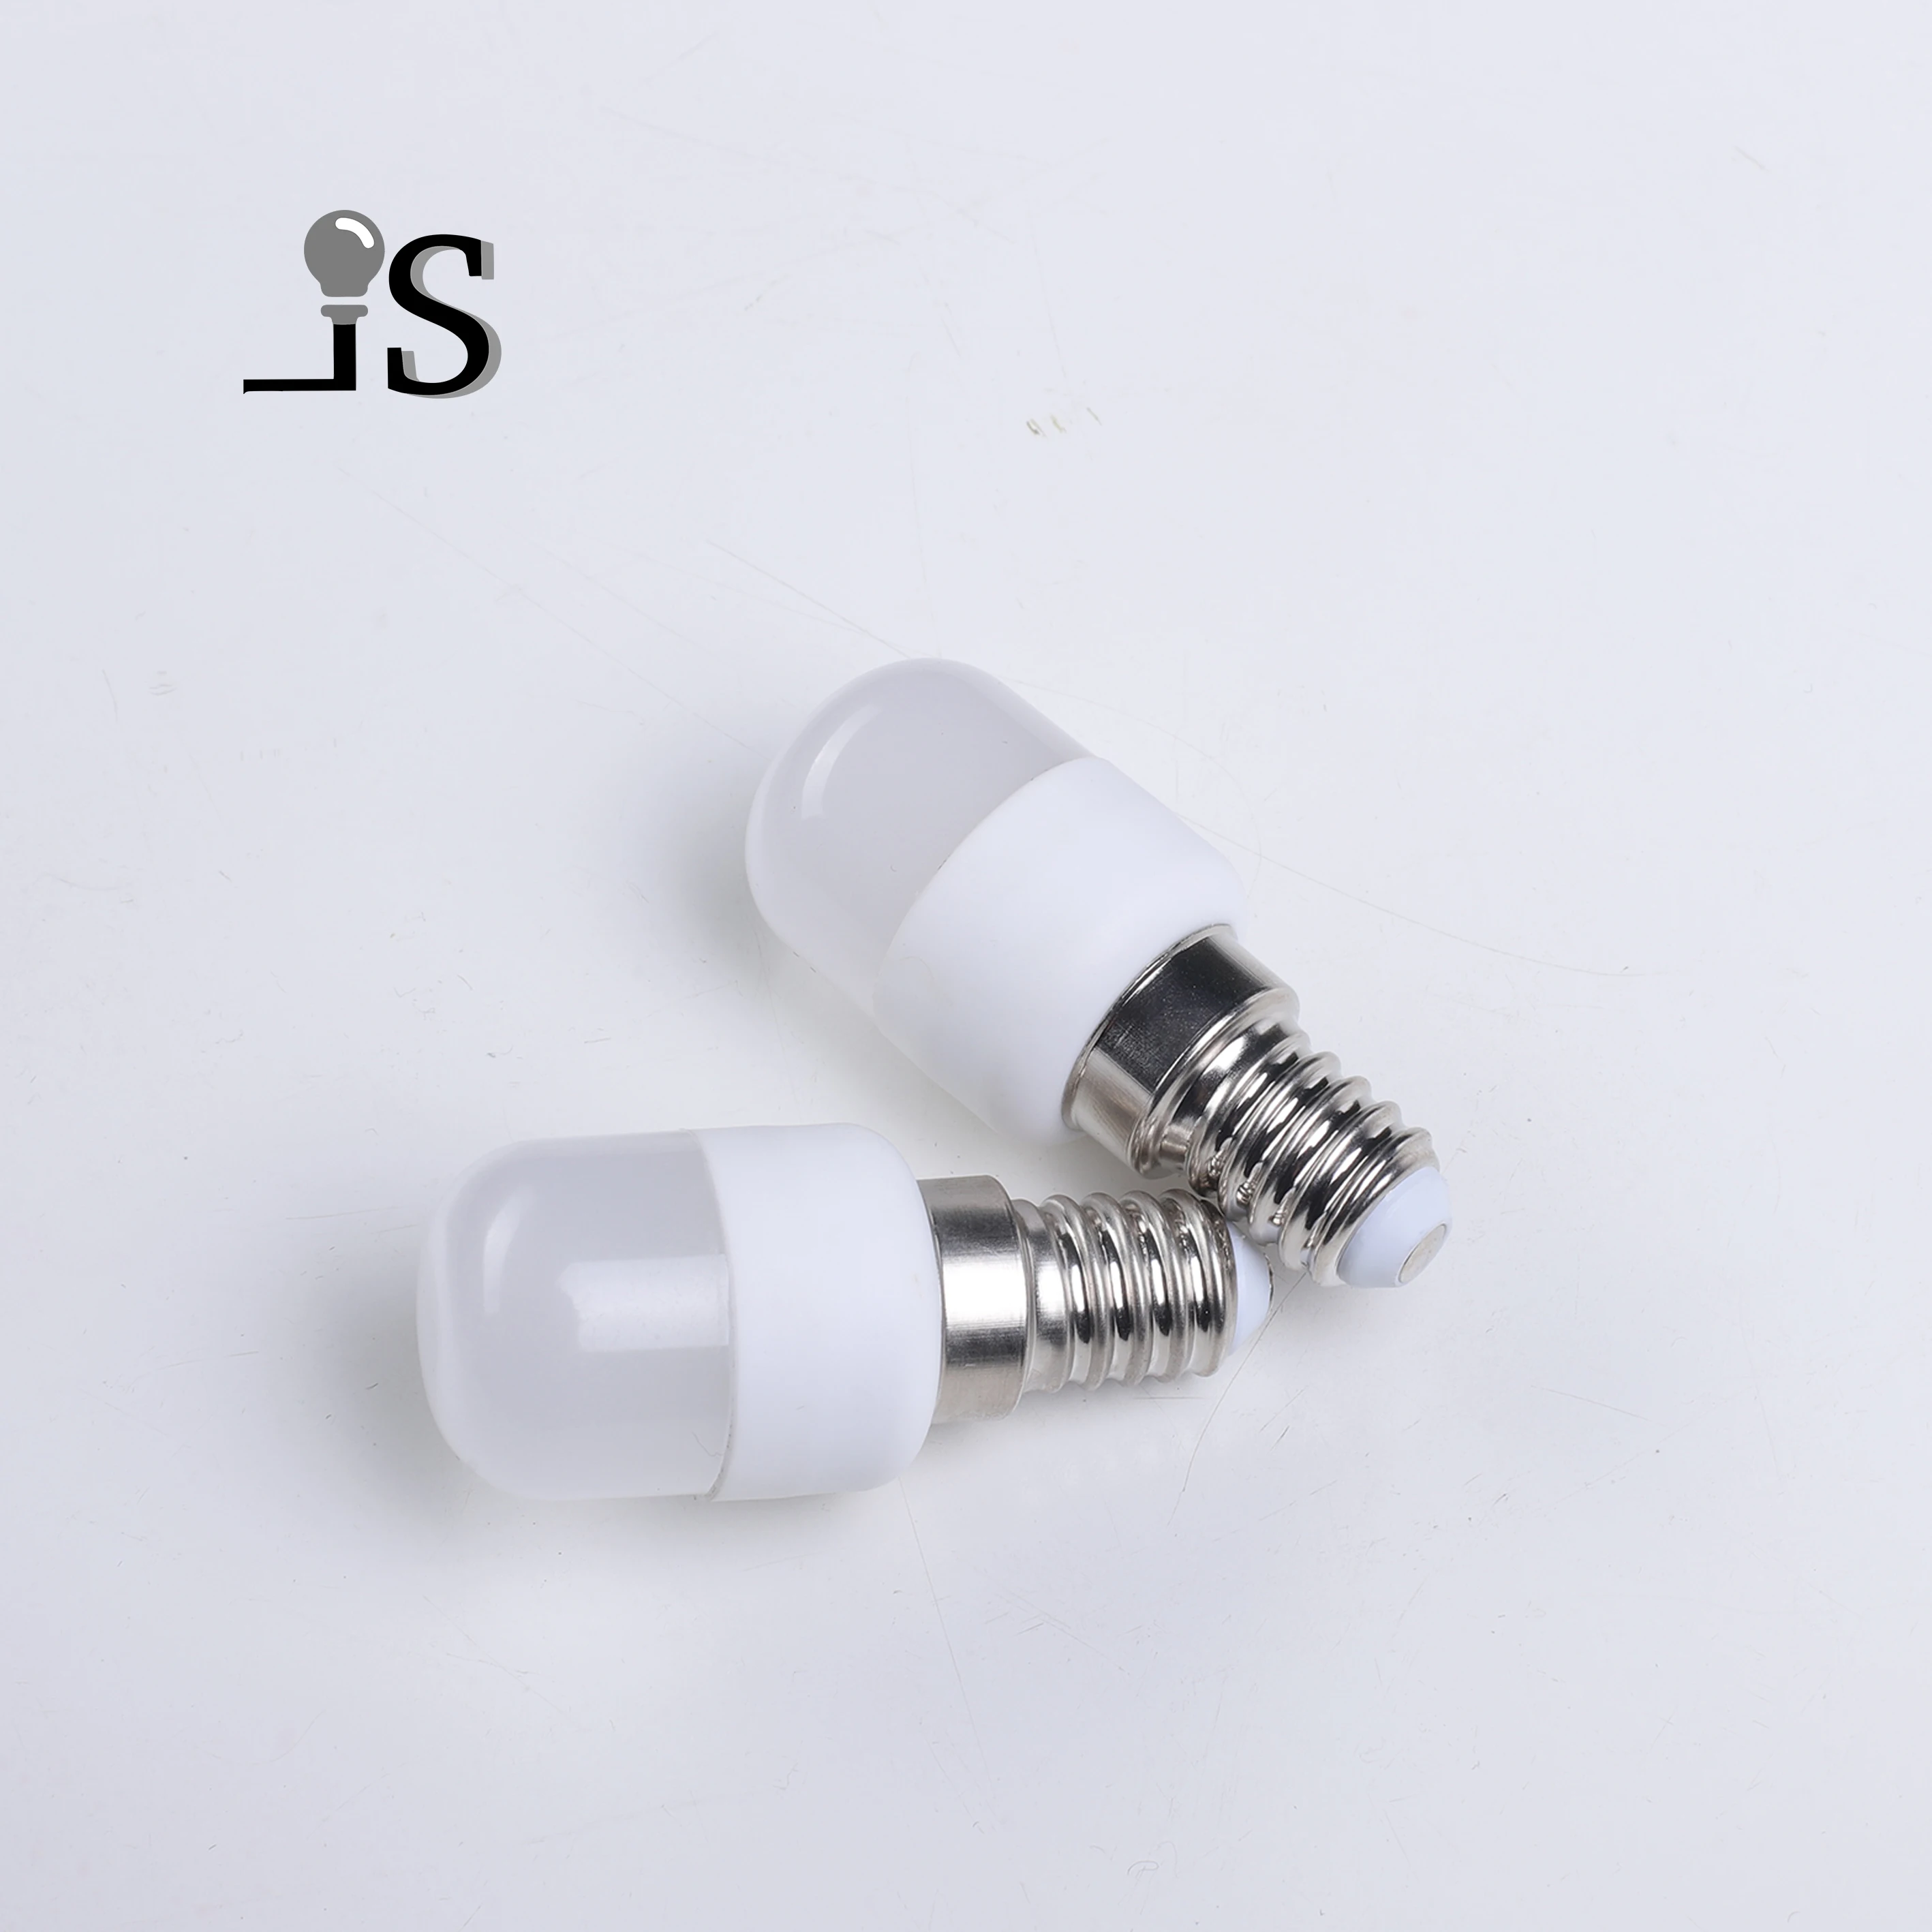 Mini E14 LED Light Bulb 1.5W 2W 3W 4W 120V-220V SMD Ceramic Lamp replace Halogen for Candle Crystal Chandelier refrigerator